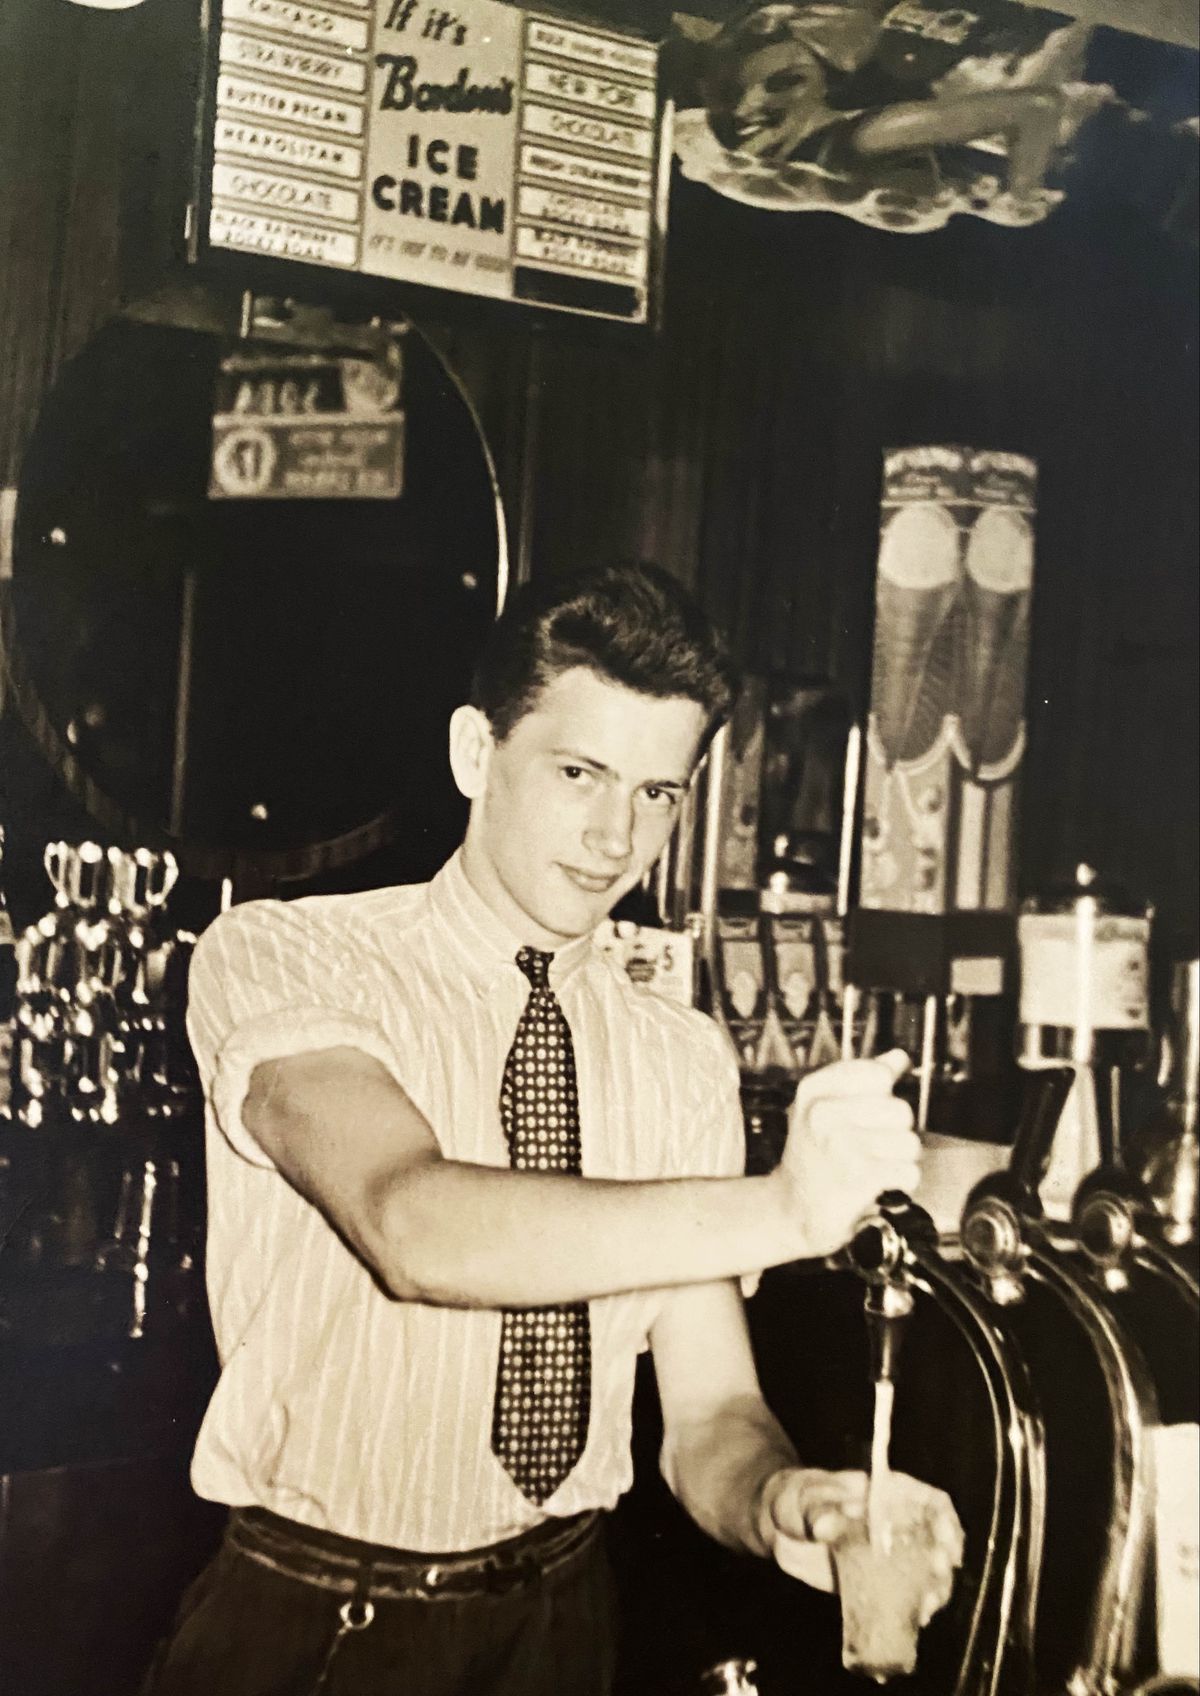 Young Bernie Roer worked as a soda jerk at a Musket & Henriksen pharmacy.